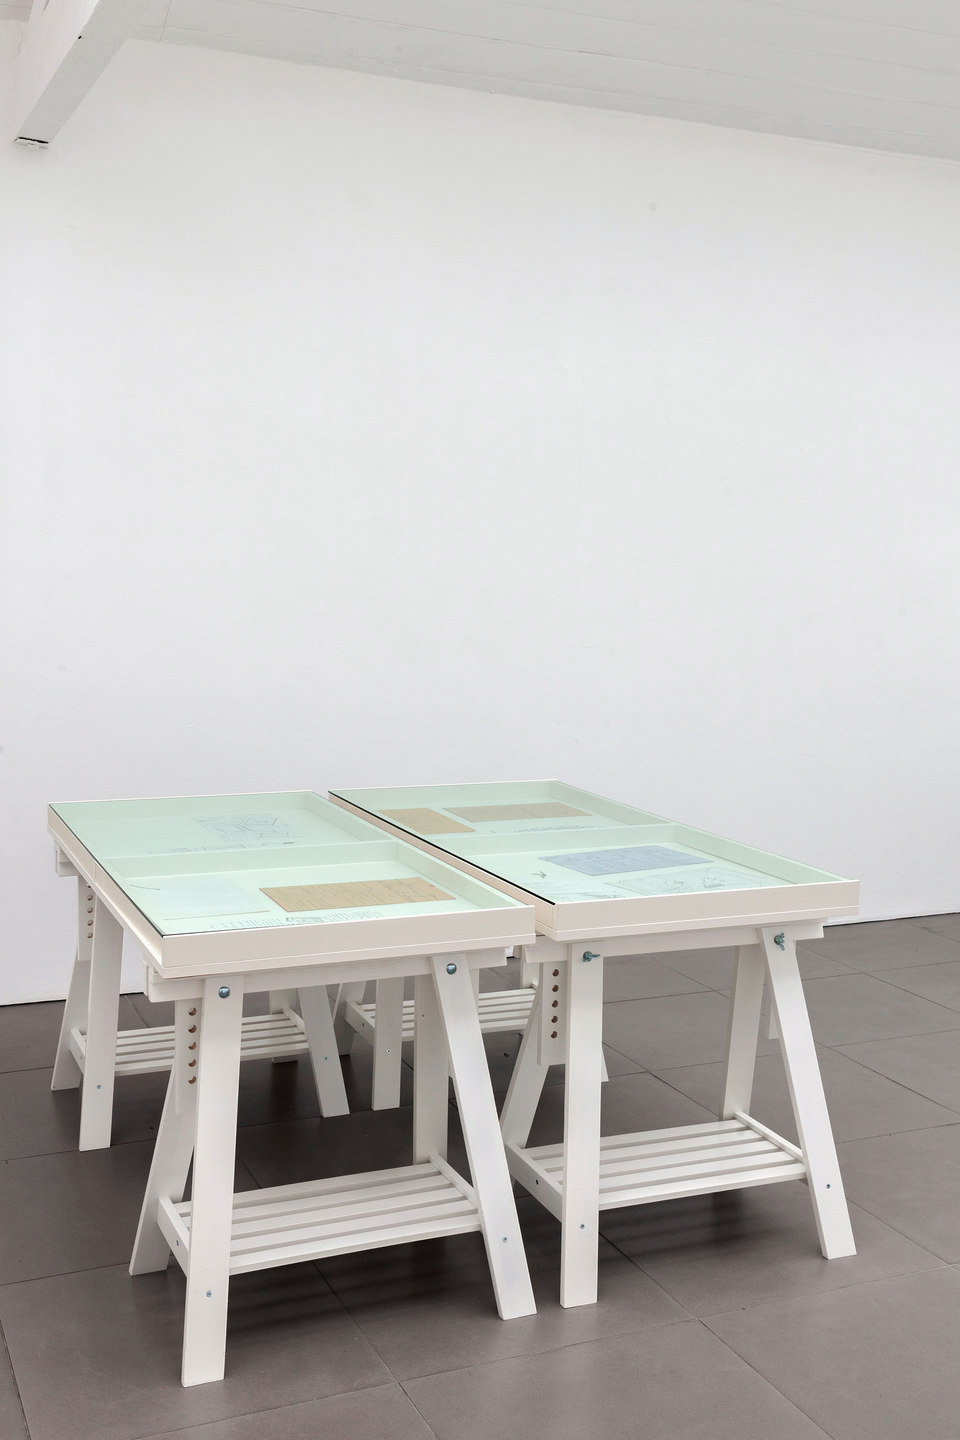 Barbara T Smith, The Poetry Sets, 1965-66,, Installation View, 2015, Cell Project Space